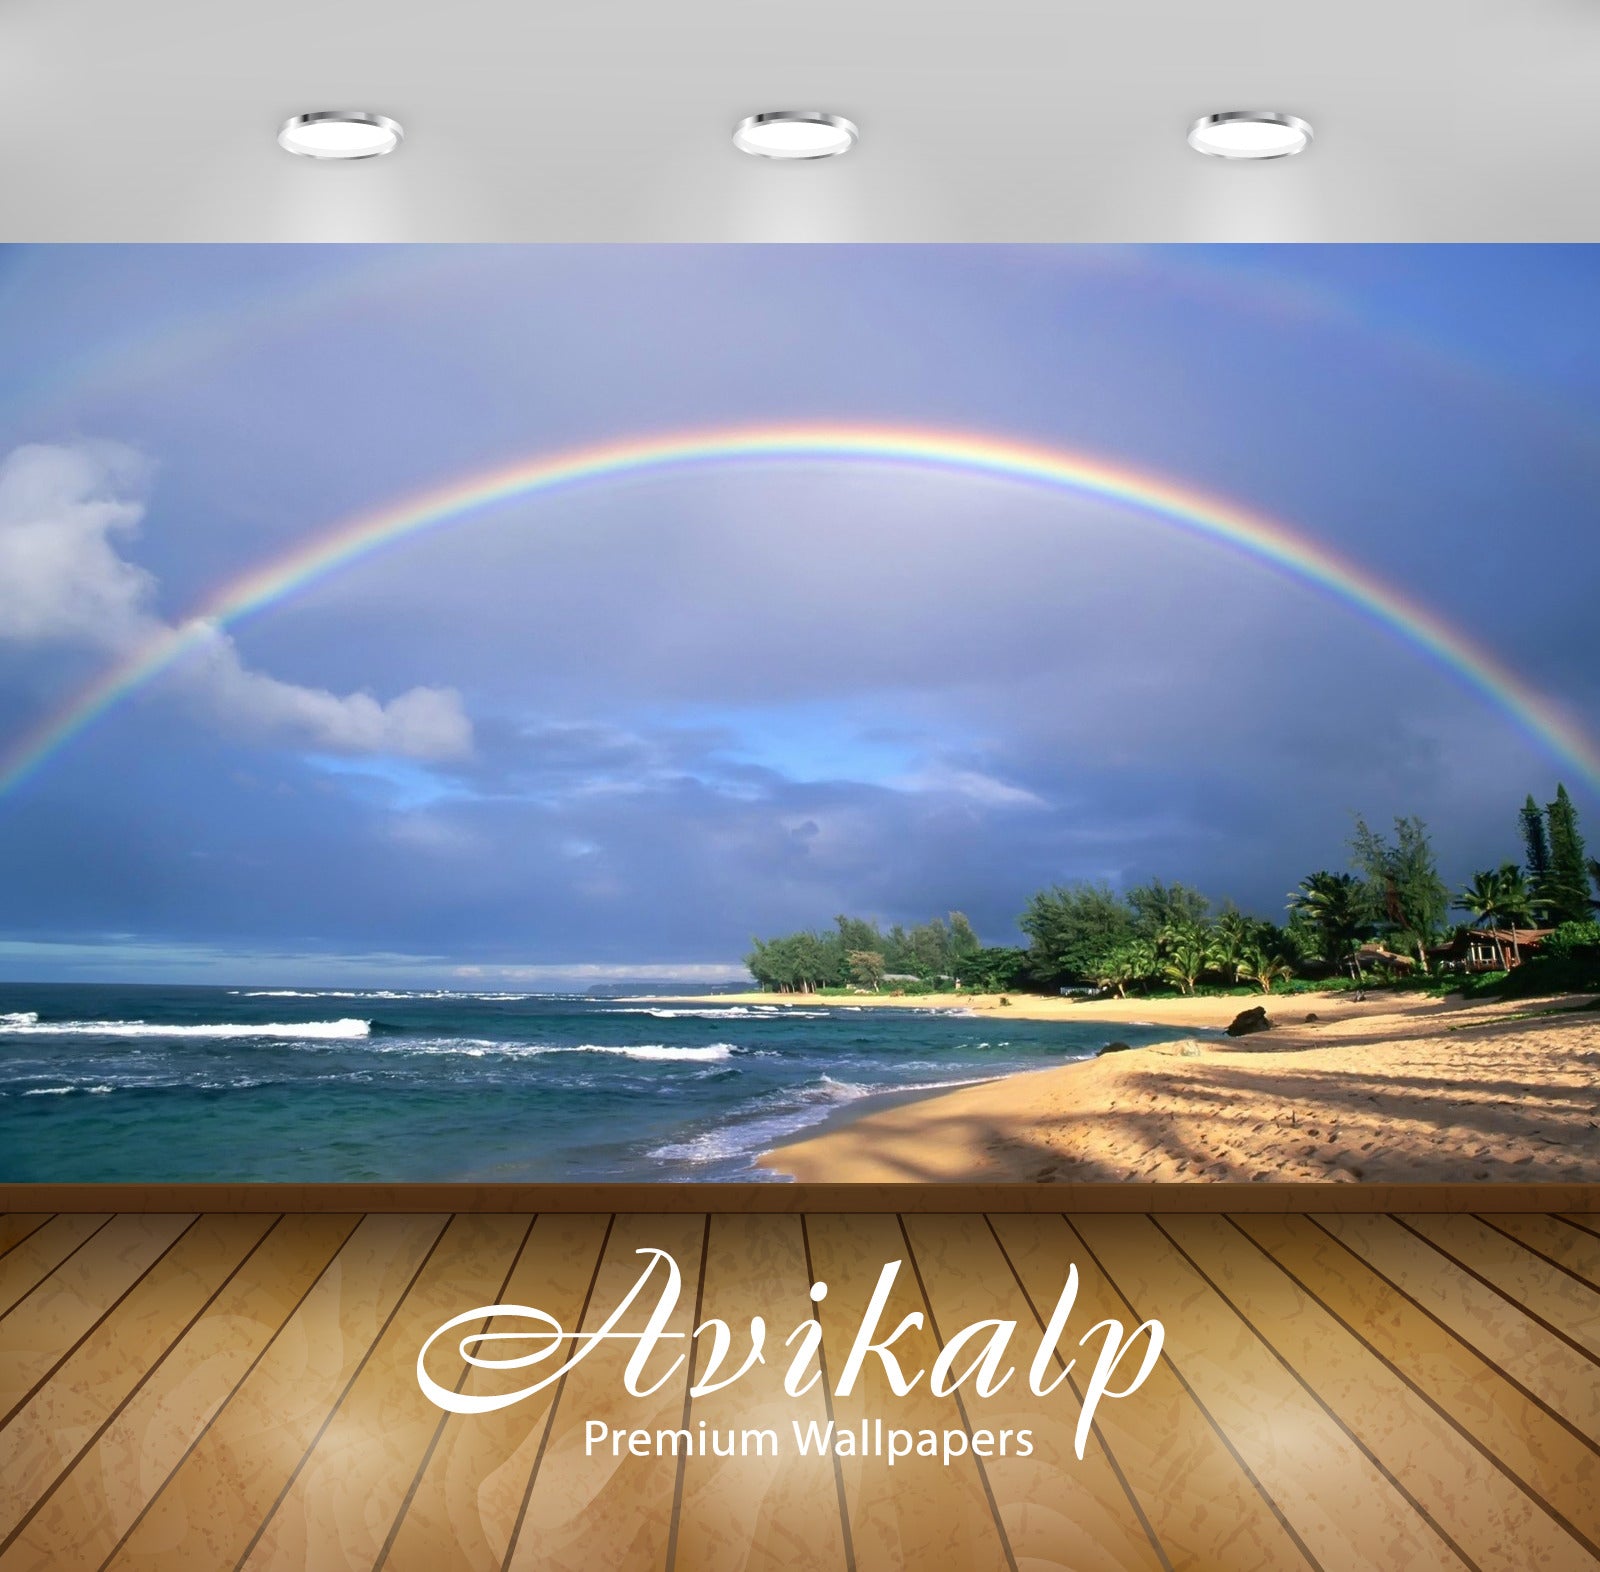 Avikalp Exclusive Awi1412 Beach Rainbow Full HD Wallpapers for Living room, Hall, Kids Room, Kitchen